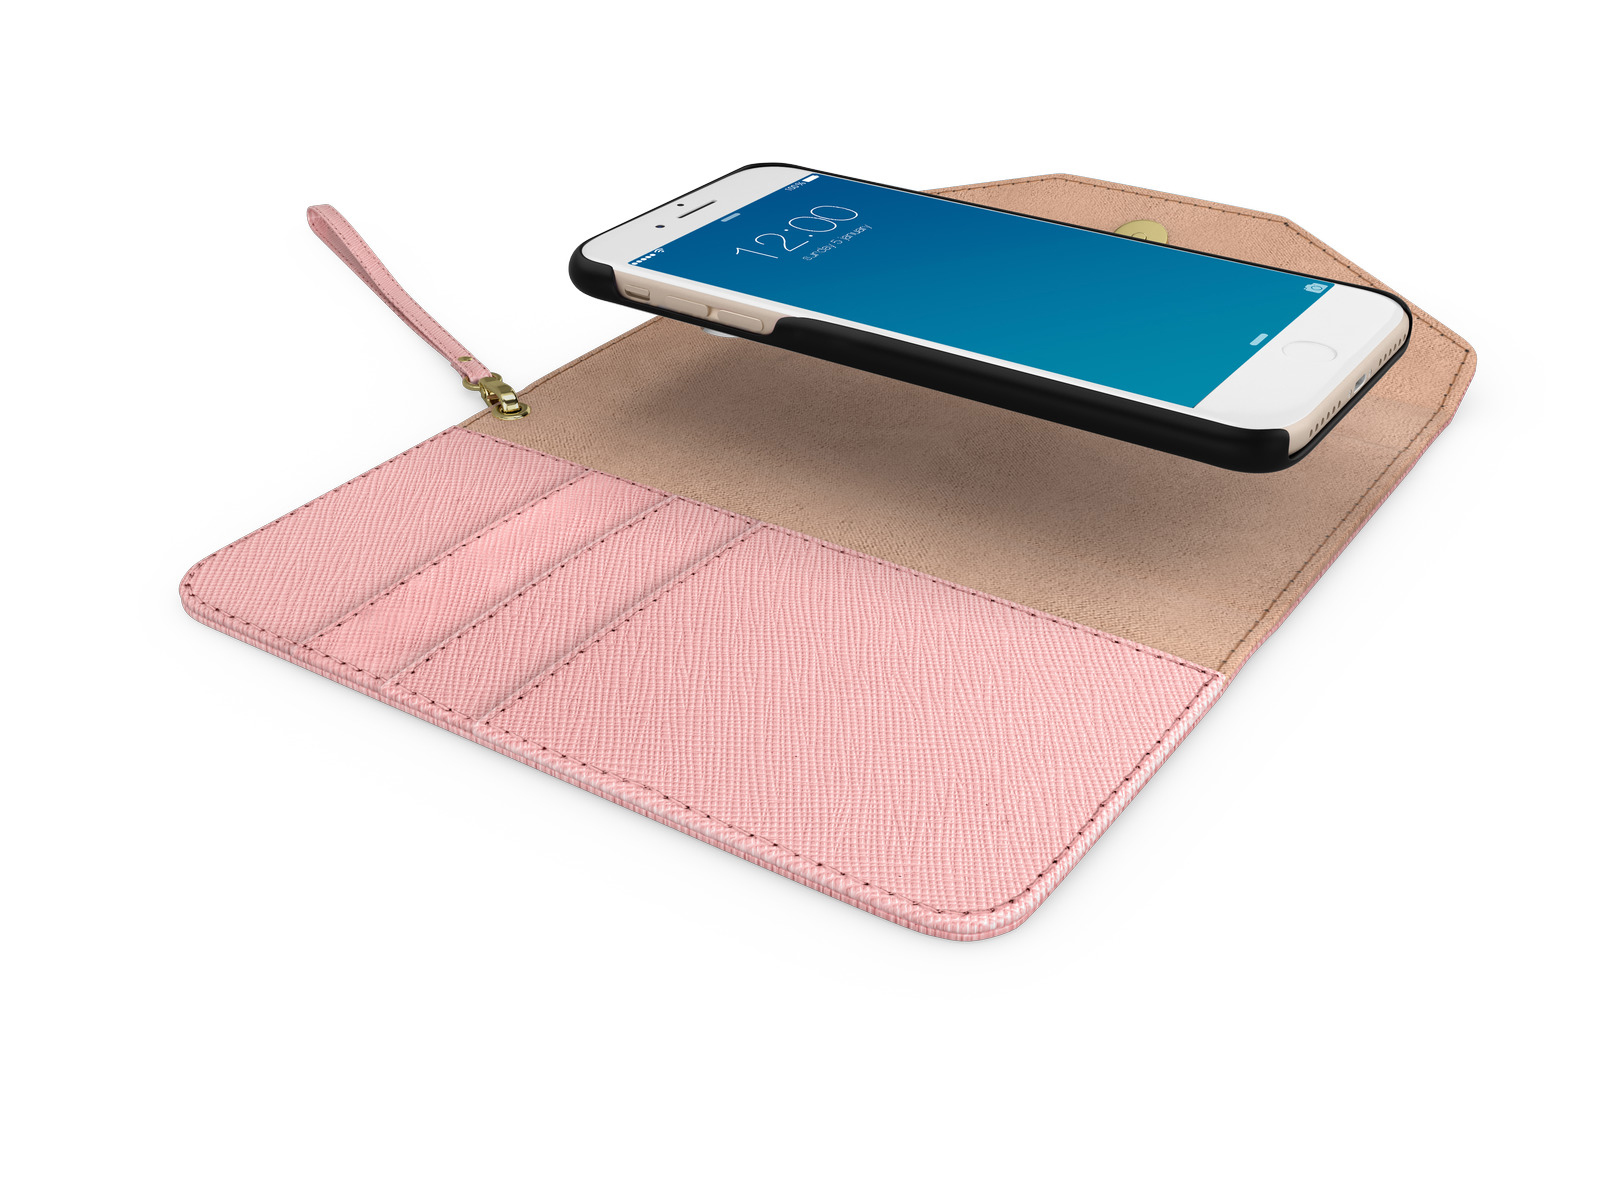 Plus IDEAL Mayfair OF Plus, iPhone Rosa Plus, iPhone Apple, SWEDEN 6 Bookcover, ,iPhone Clutch, 8 7